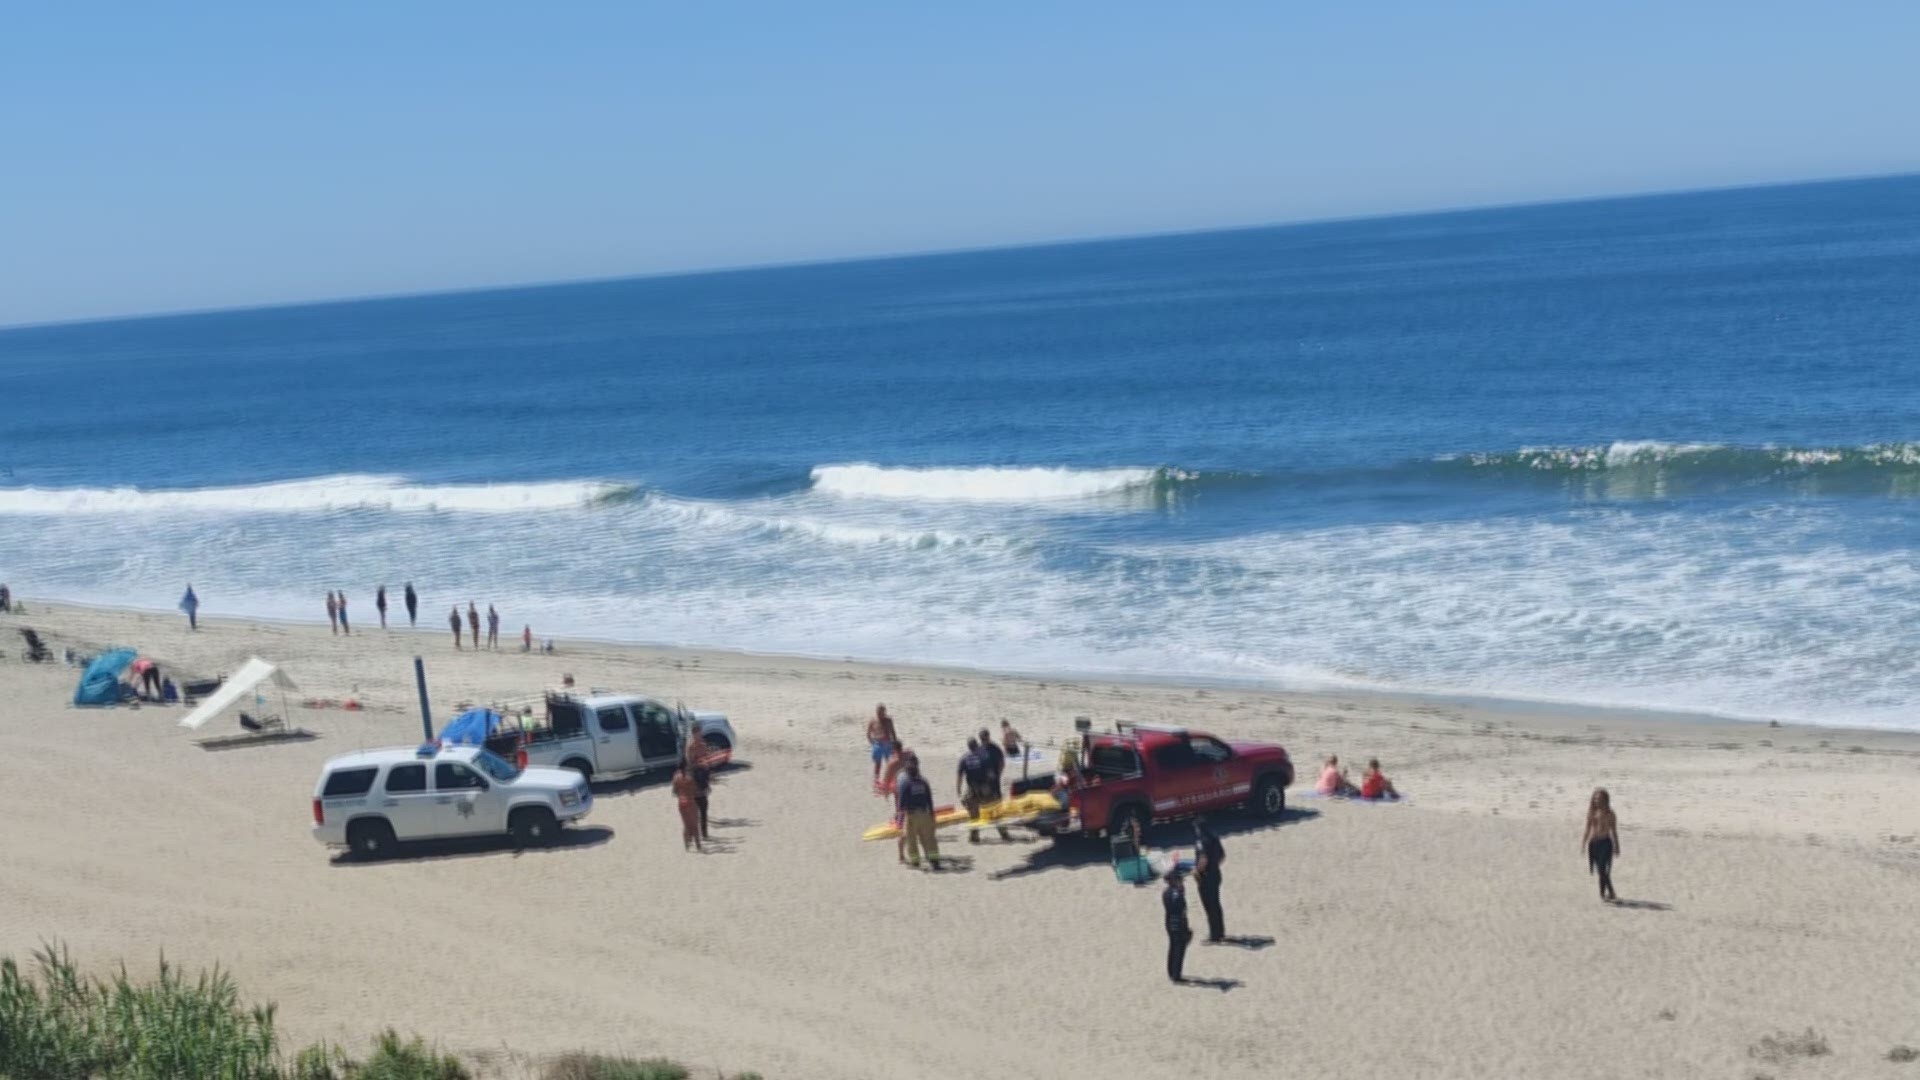 Lifeguards found the body 40 to 50 yards offshore Thursday morning.